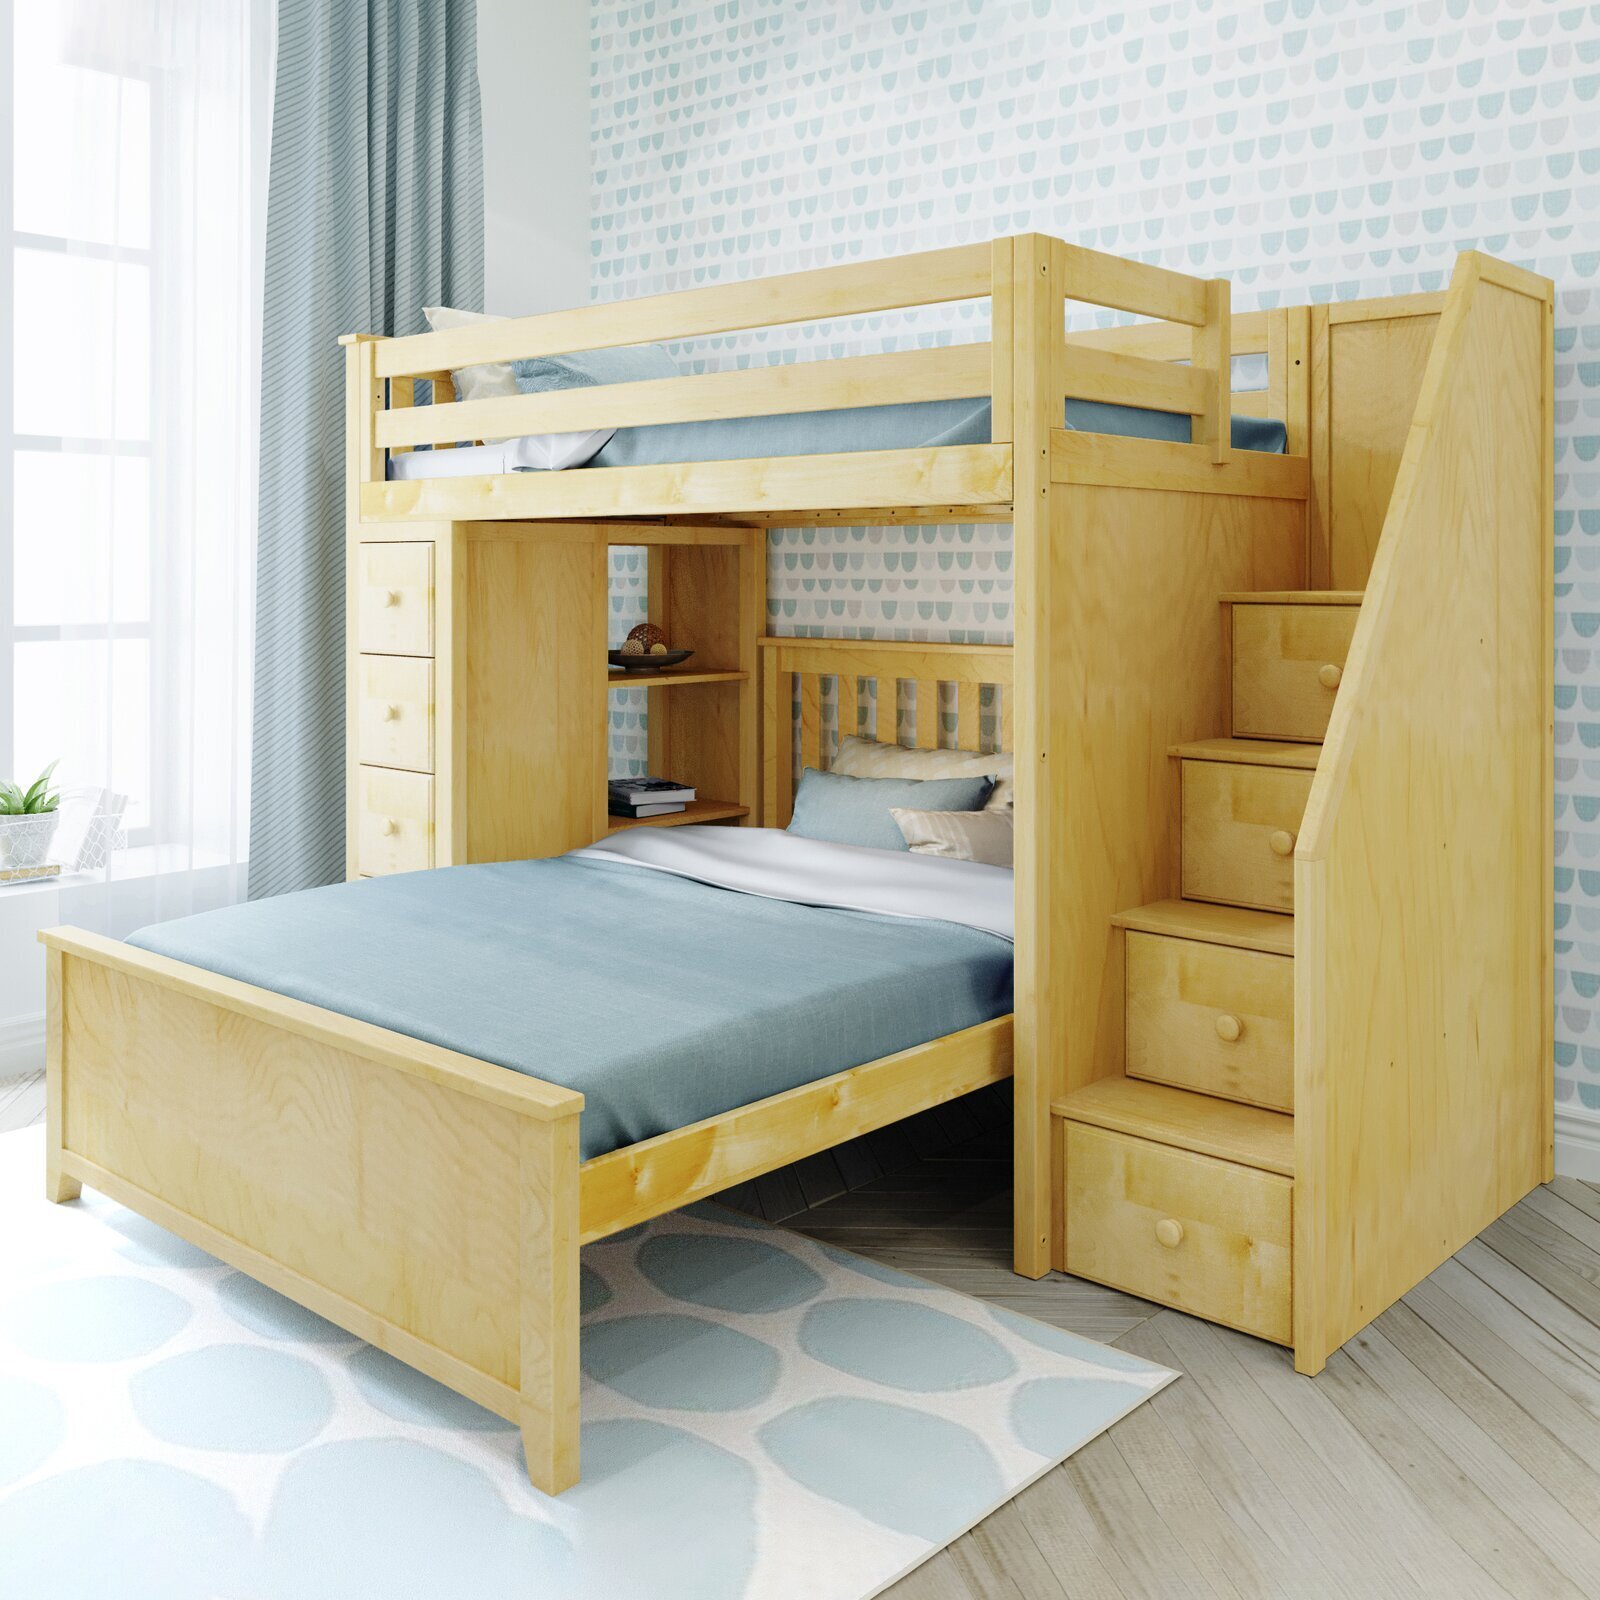 Big and Bold Storage and Bunk Beds